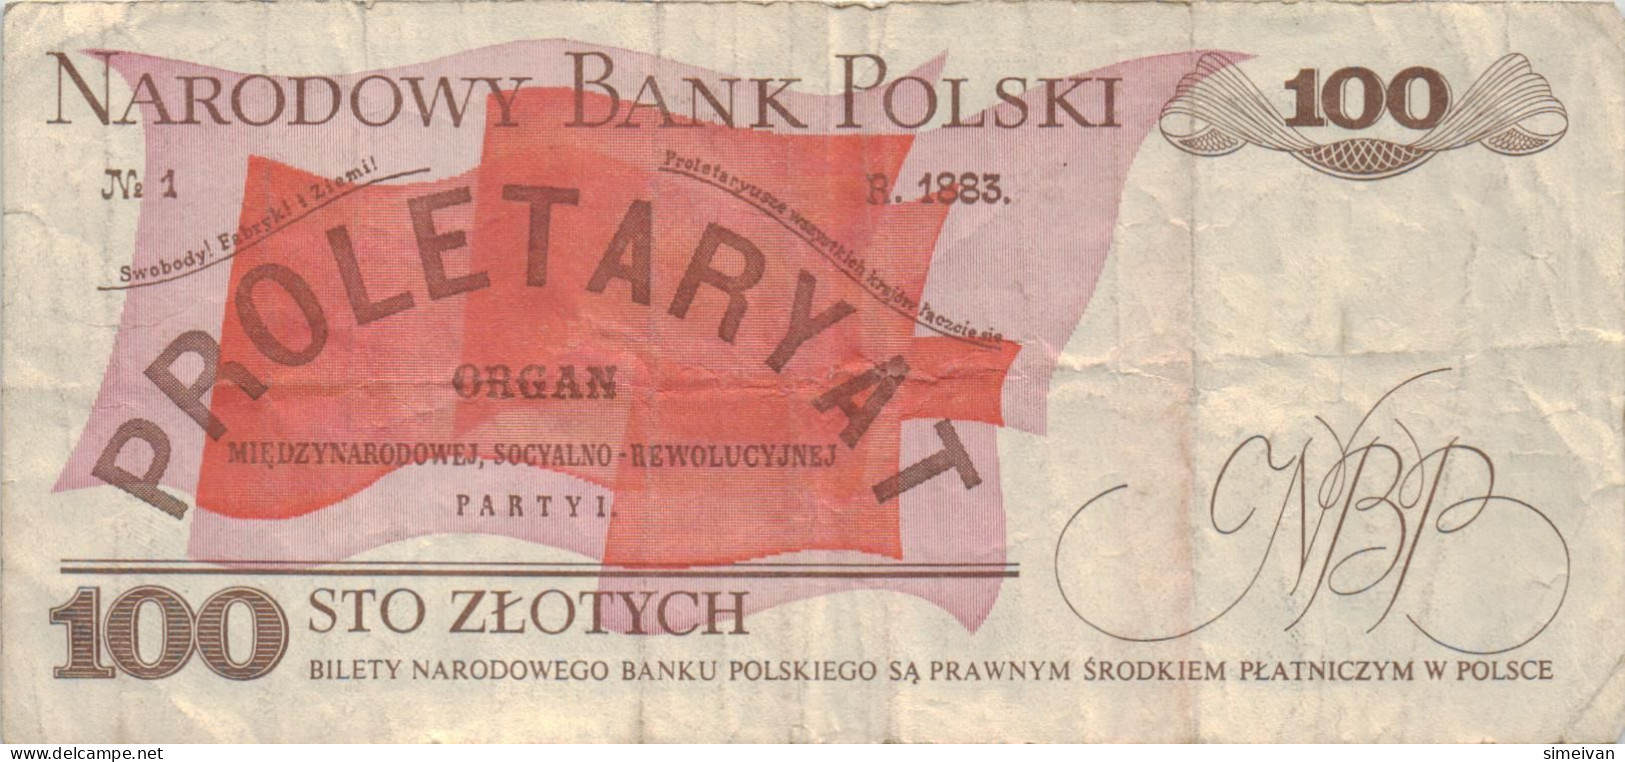 Poland 100 Zlotych 1986 P-143e Banknote Europe Currency Pologne Polen #5303 - Pologne